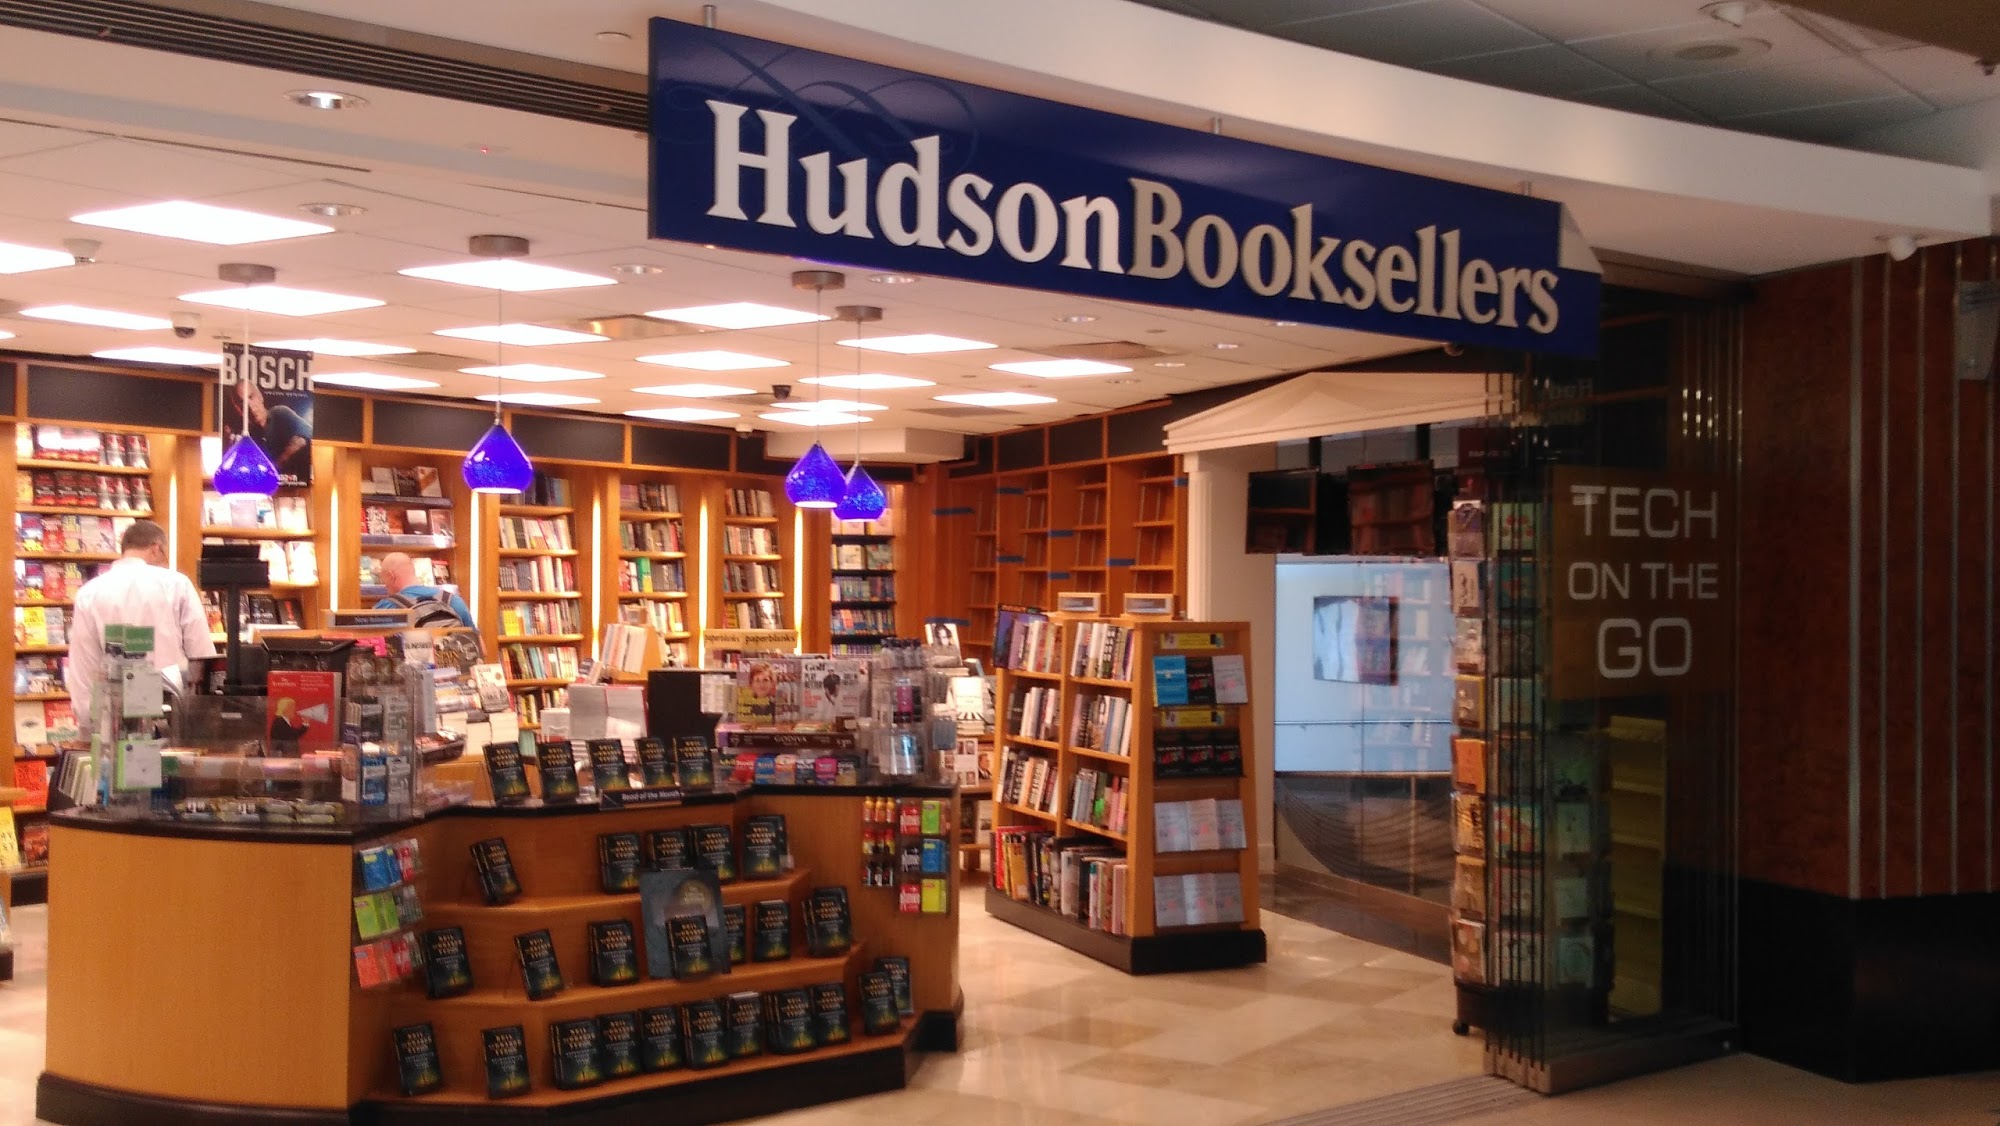 Hudson Booksellers